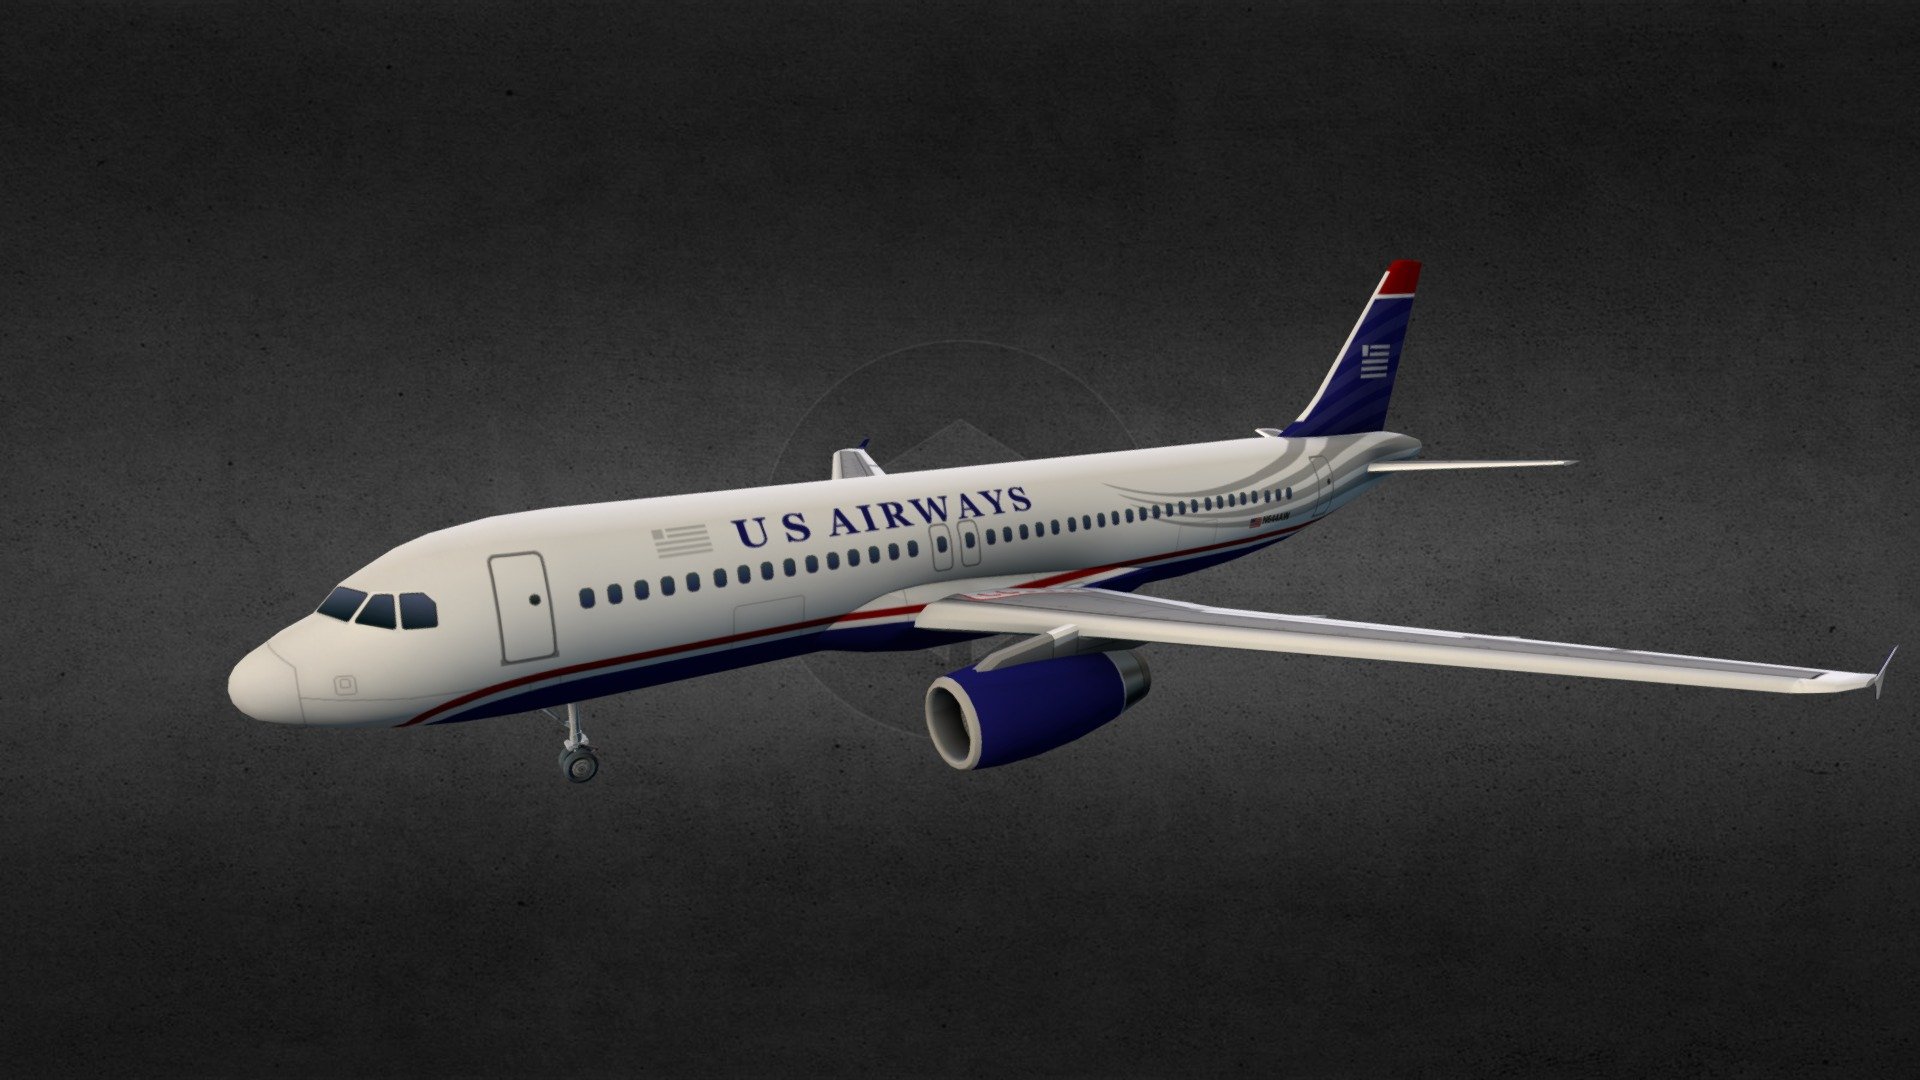 The Airbus A320 family consists of short- to medium-range, narrow-body, commercial passenger twin-engine jet airliners manufactured by Airbus.
This digital model is based on the Airbus A-320 aircraft with a &ldquo;US Airways